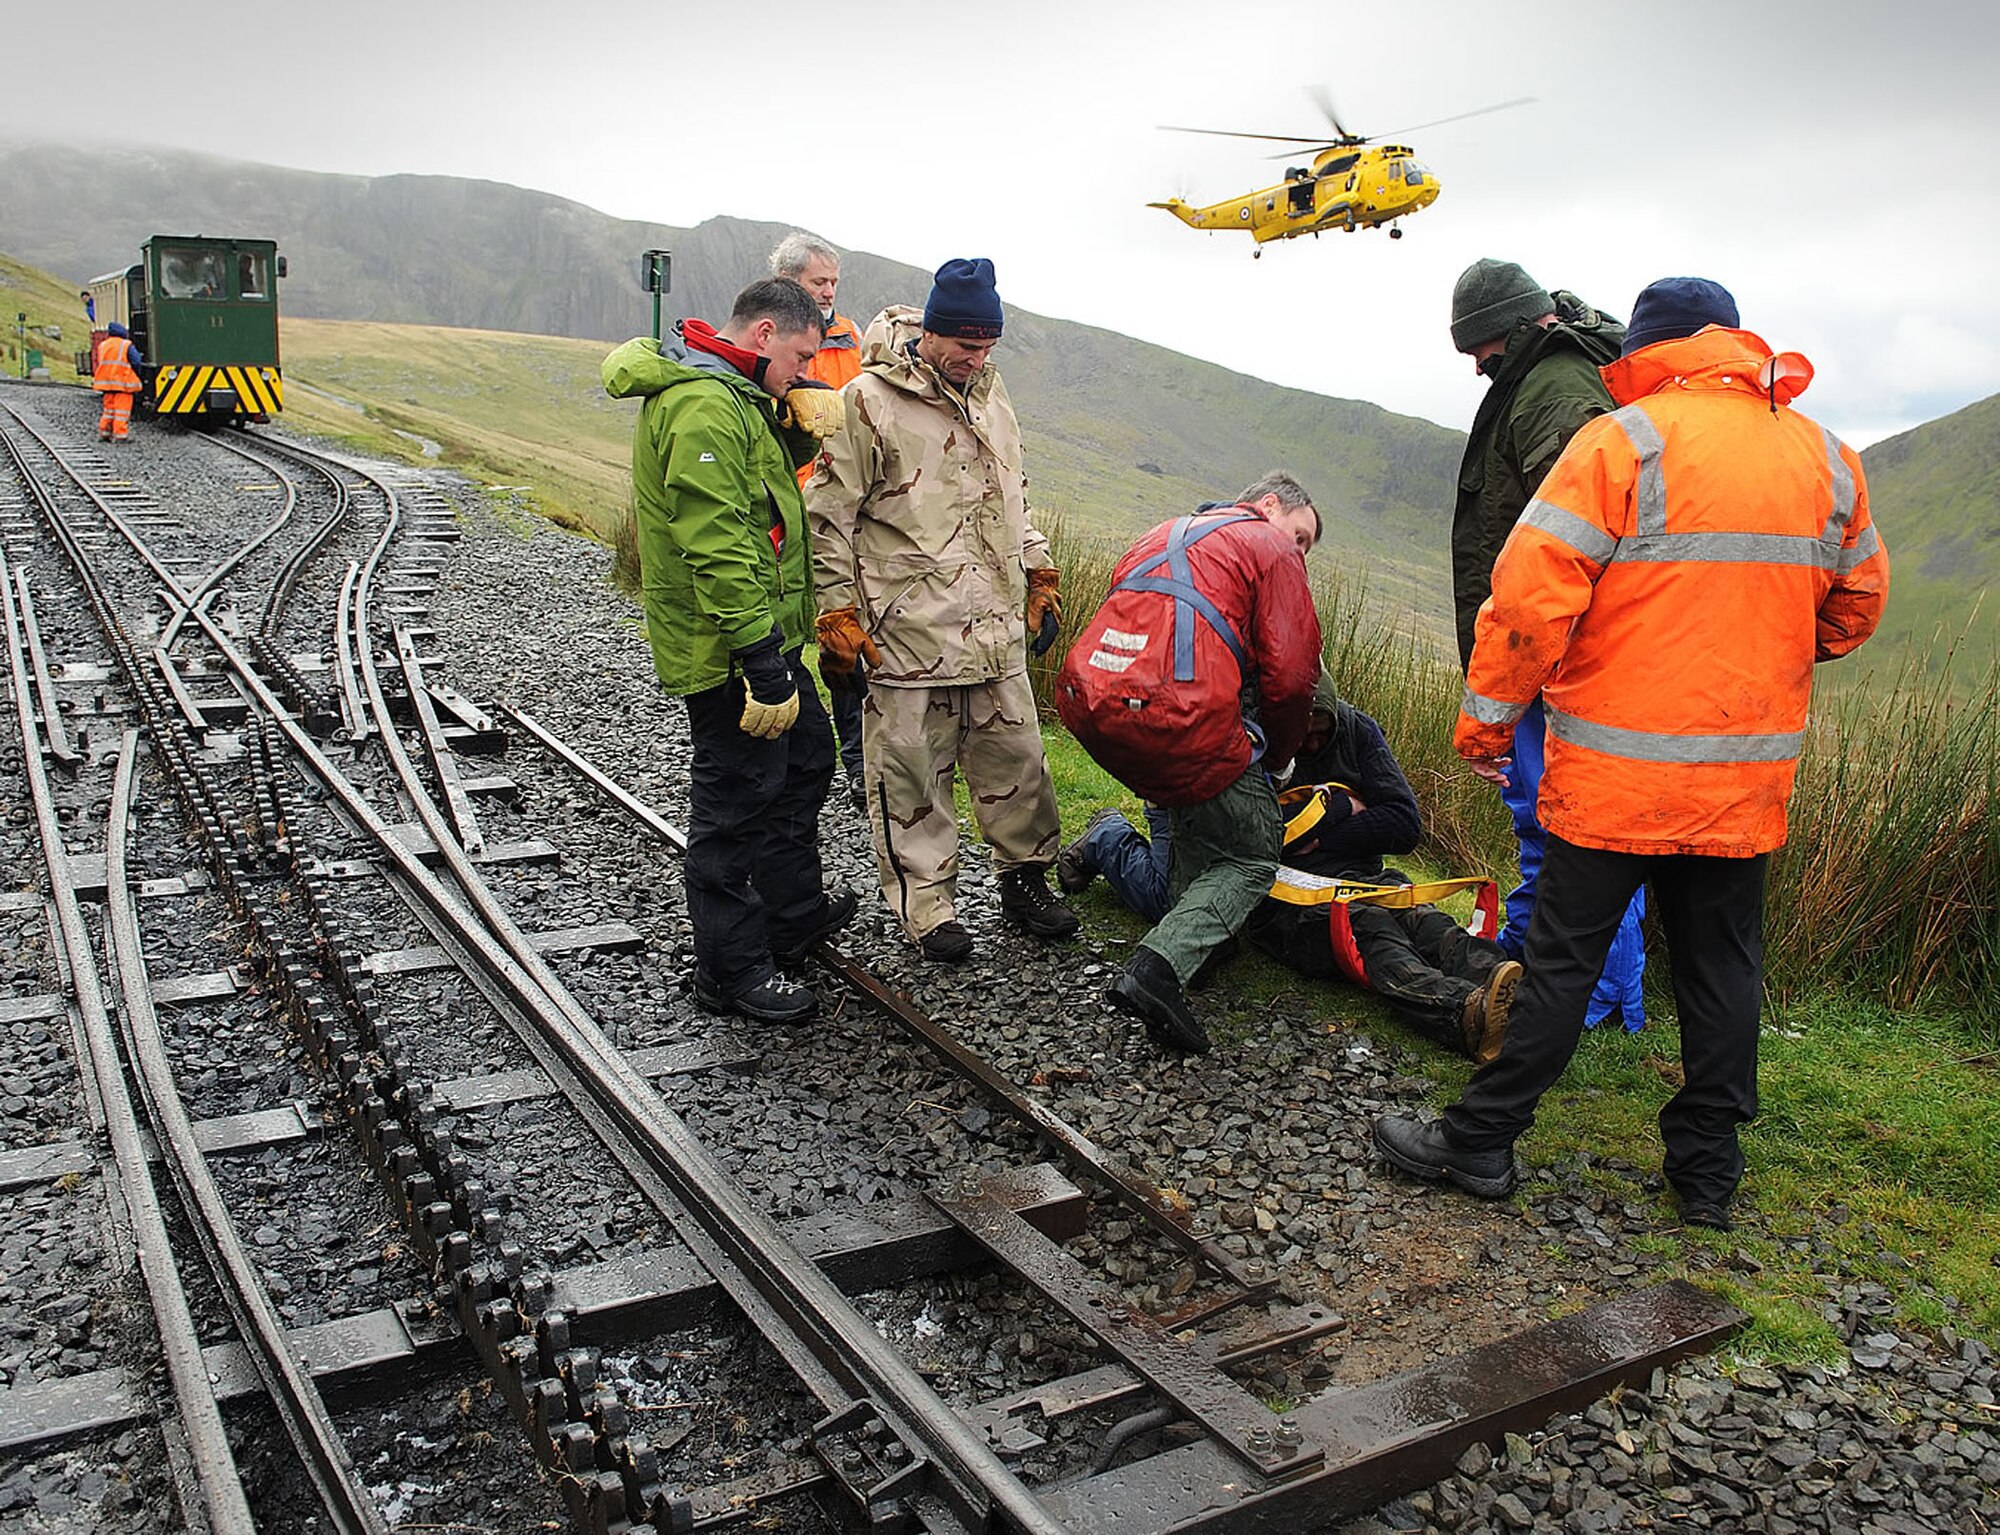 Dave Wainwright, 100th Force Support Squadron Outdoor Recreation director, and Defence Fire Service firefighters Chris Gould, Jerry Myles and Alan Coldwell, all 100th Civil Engineer Squadron, look on with members of the Snowdon Mountain Railway to ensure the casualty they rescued from the top of Mount Snowdon is safely prepared by the winchman to be taken up into the rescue helicopter from 22 Squadron, RAF Valley, Wales.(Courtesy photo from Snowdon Mountain Railway)